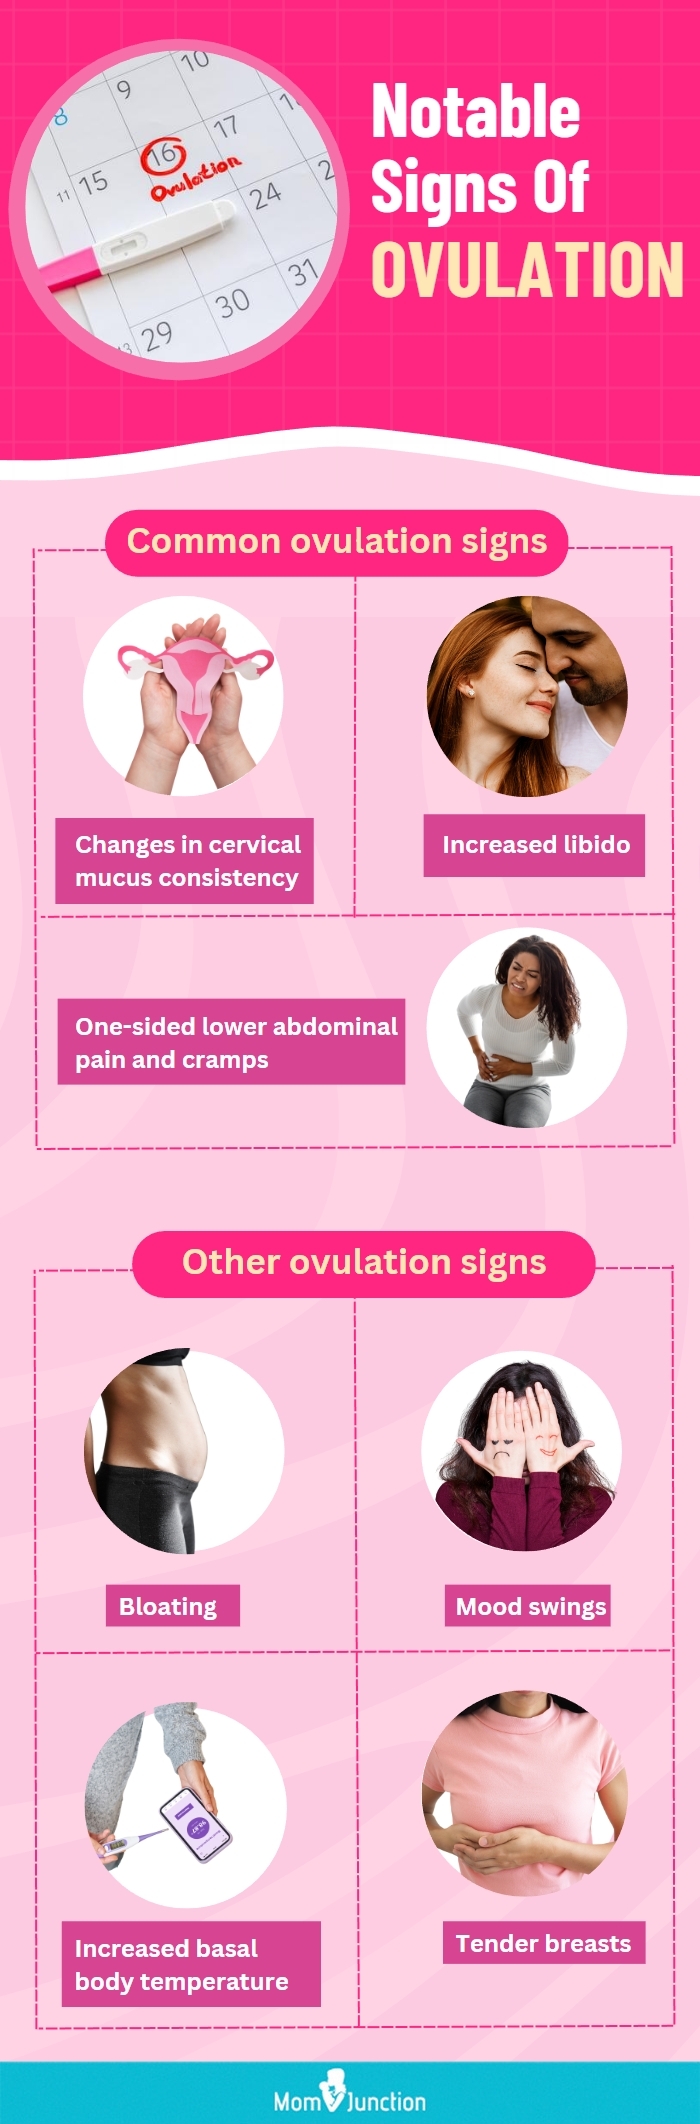 10 Signs Your Ovulation Period Is Over